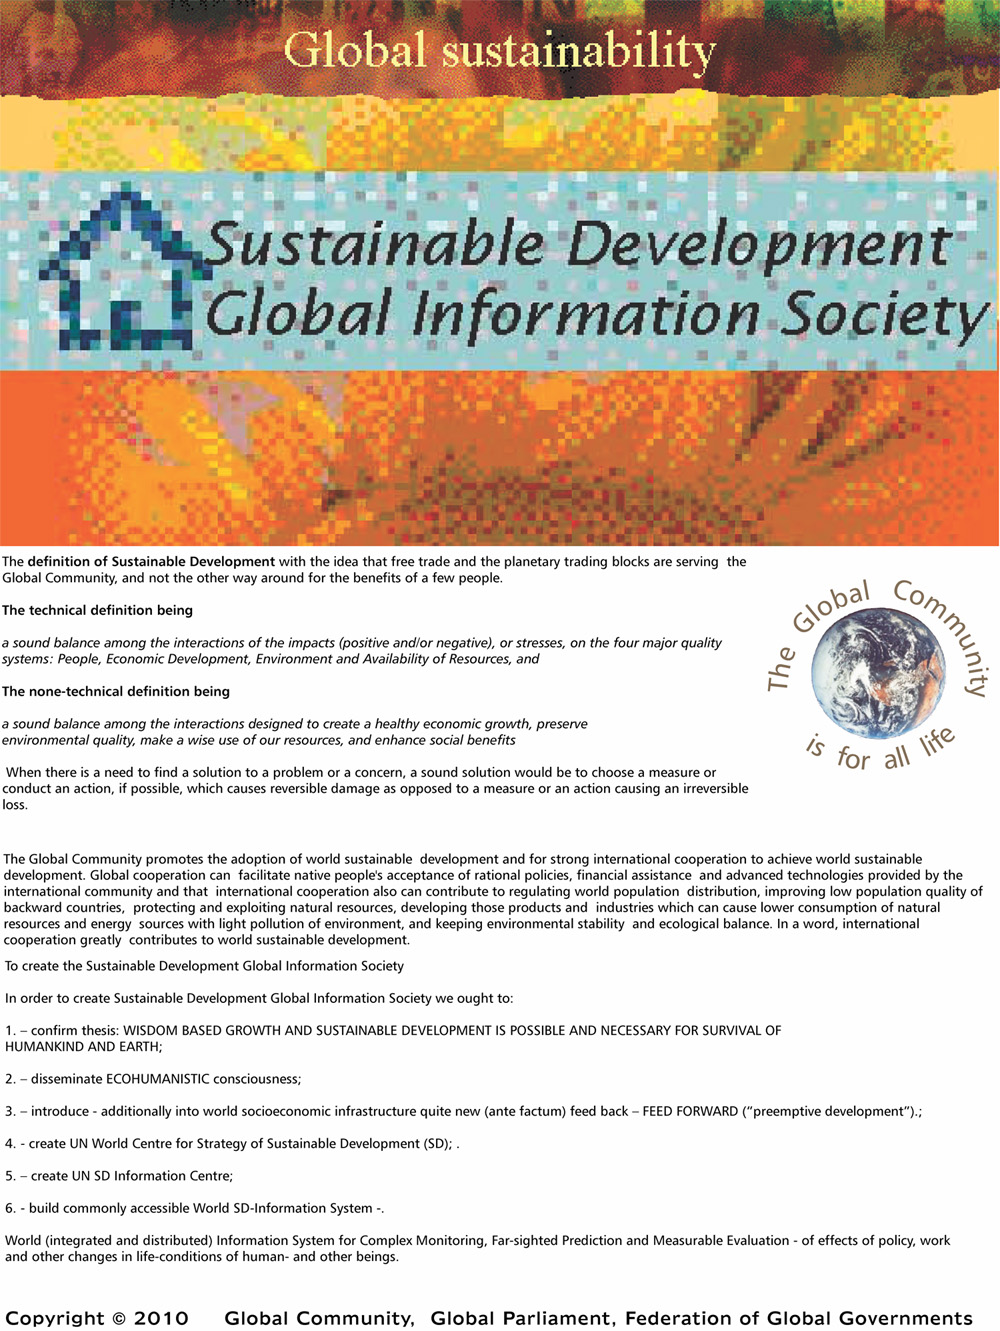  The Sustainable Development Global Information Society website is managed by Leslaw Michnowski 